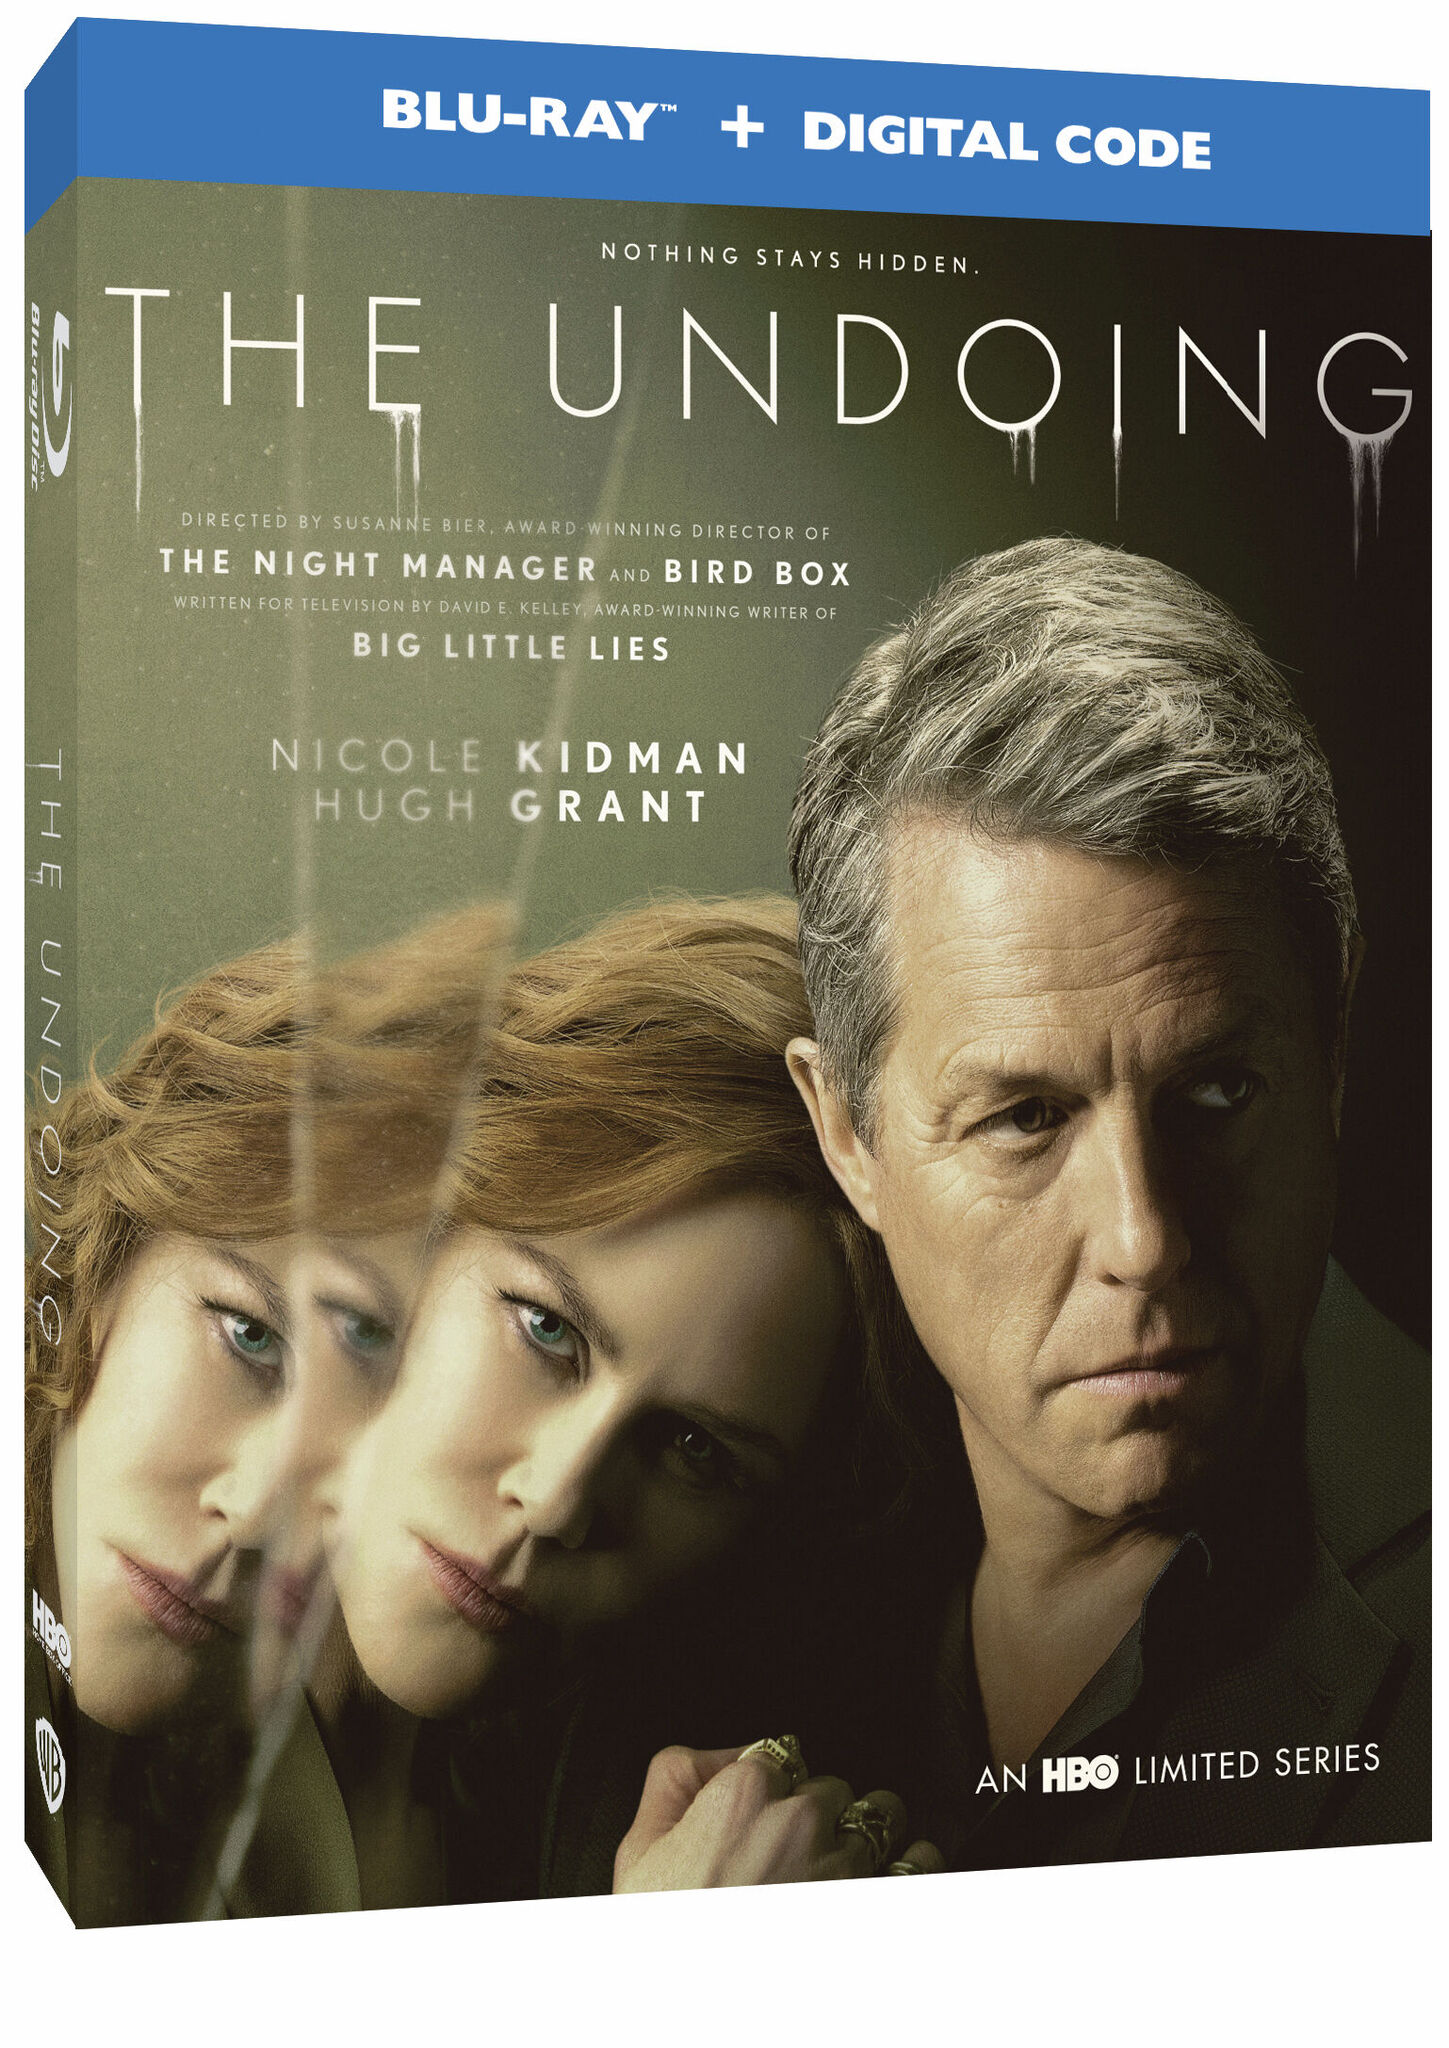 The Undoing, Official Website for the HBO Series